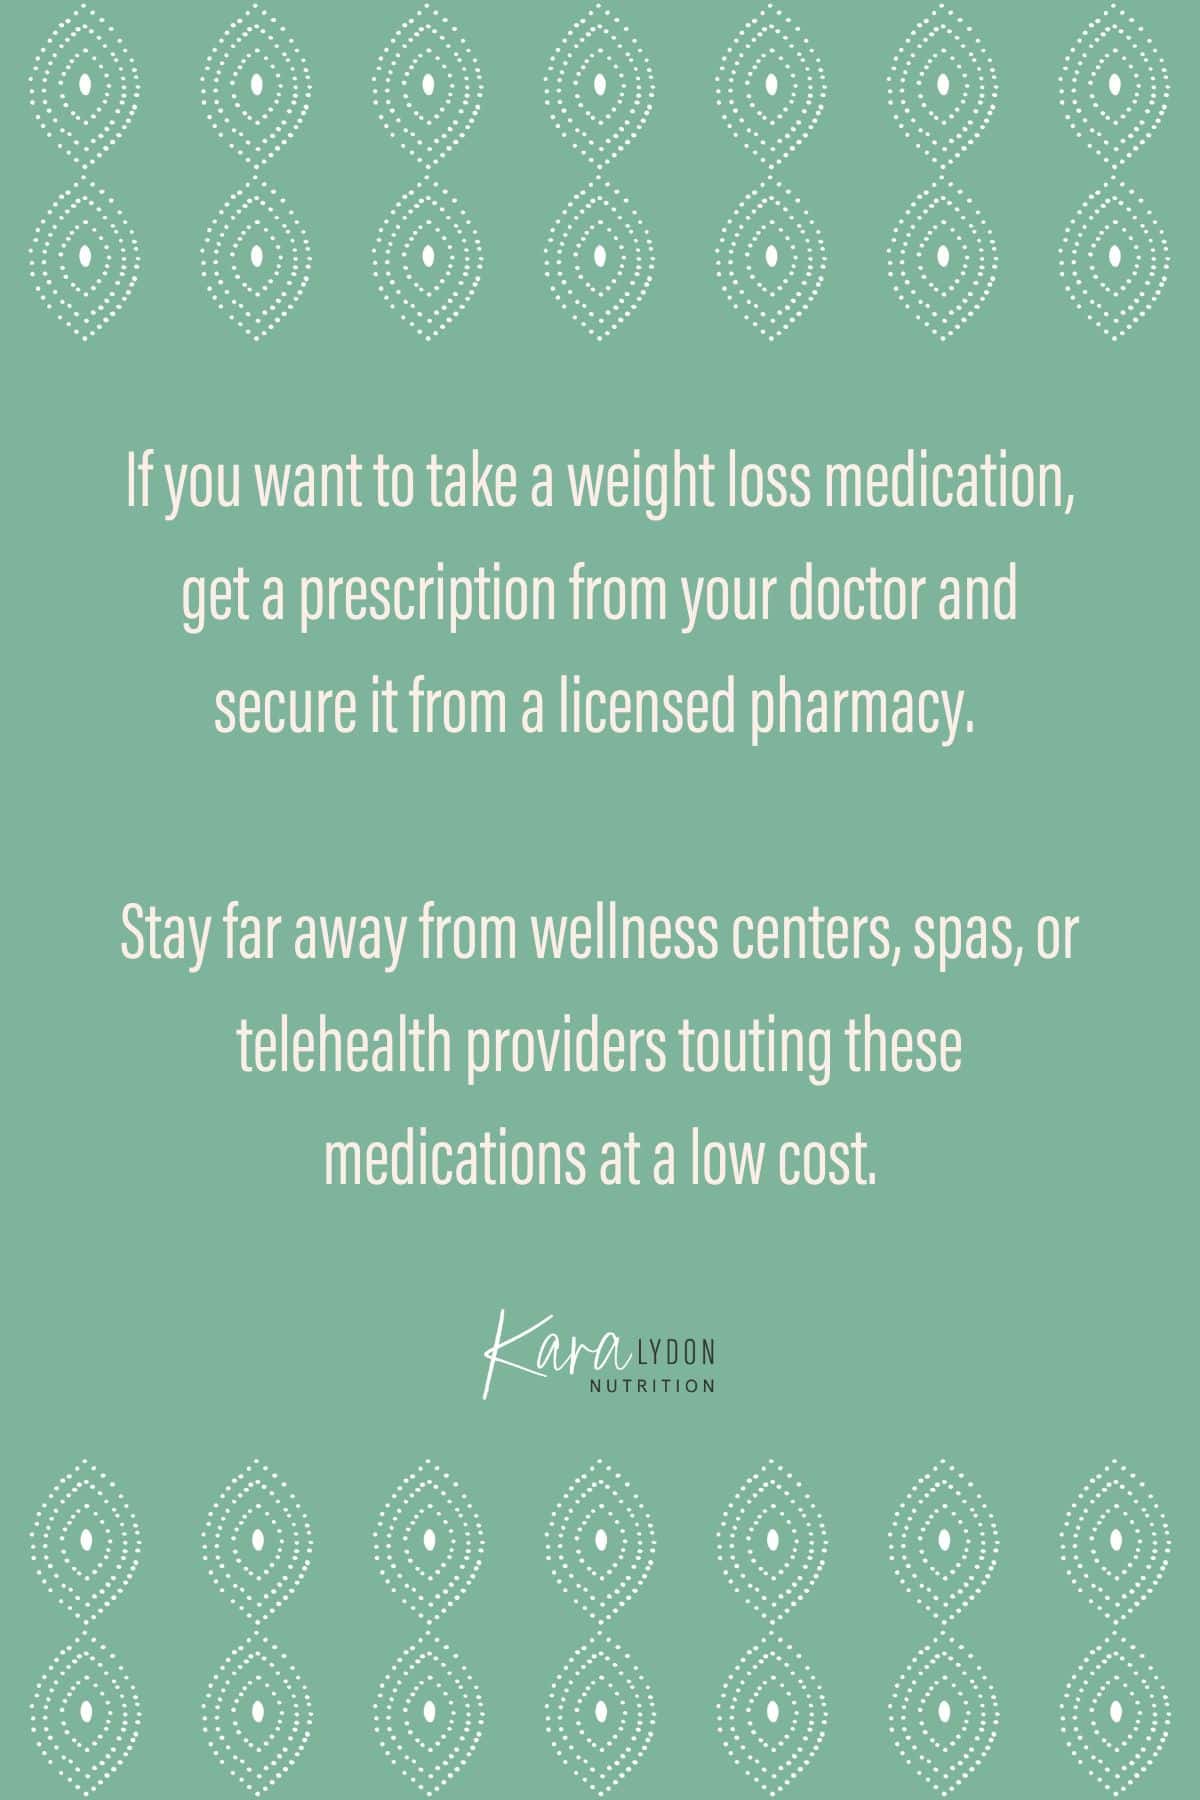 Graphic with quote: "If you want to take a weight loss medication, get a prescription from your doctor and secure it from a licensed pharmacy. Stay far away from wellness centers, spas, or telehealth providers touting these medications at a low cost."